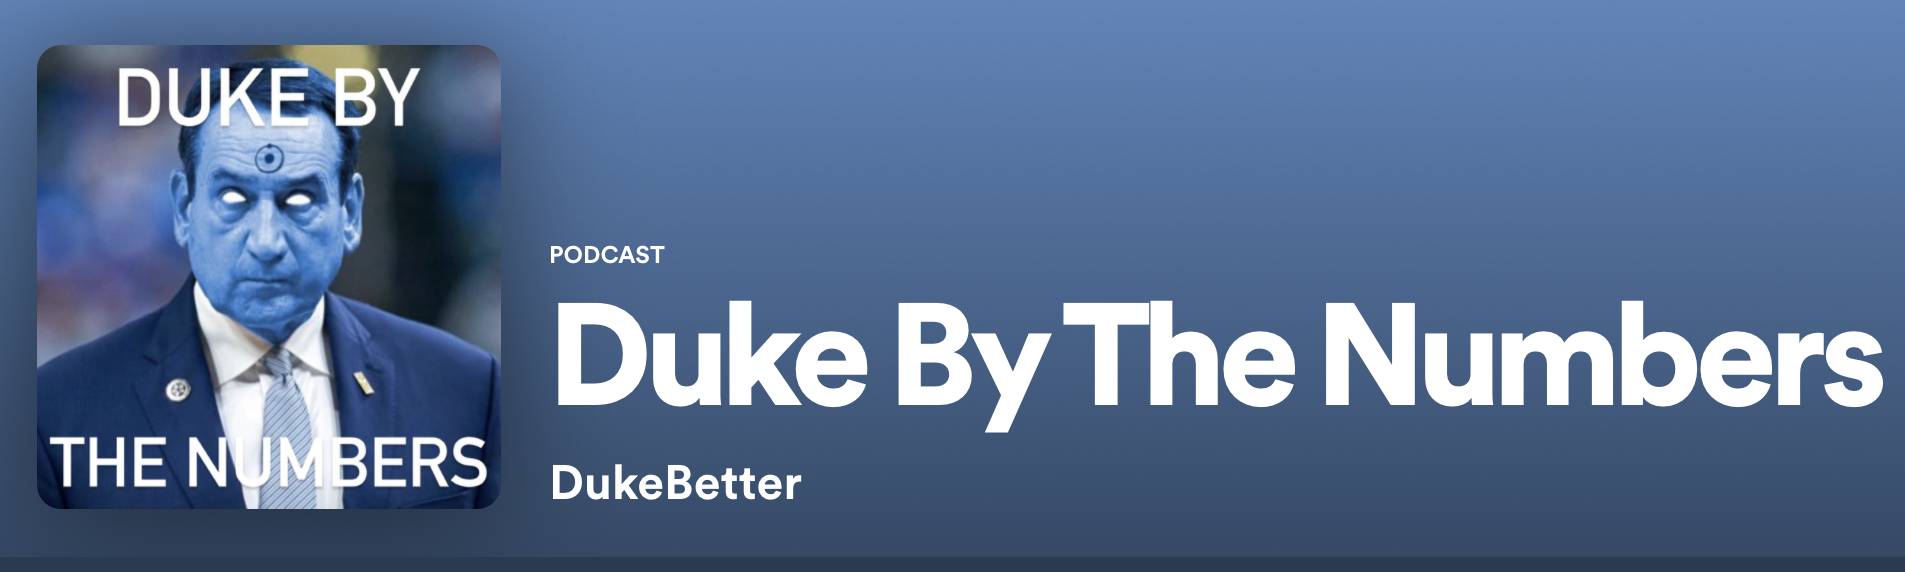 @dukebetter Starts an Excellent Podcast Discussing Duke Analytics | Well Worth Your Time & Ears